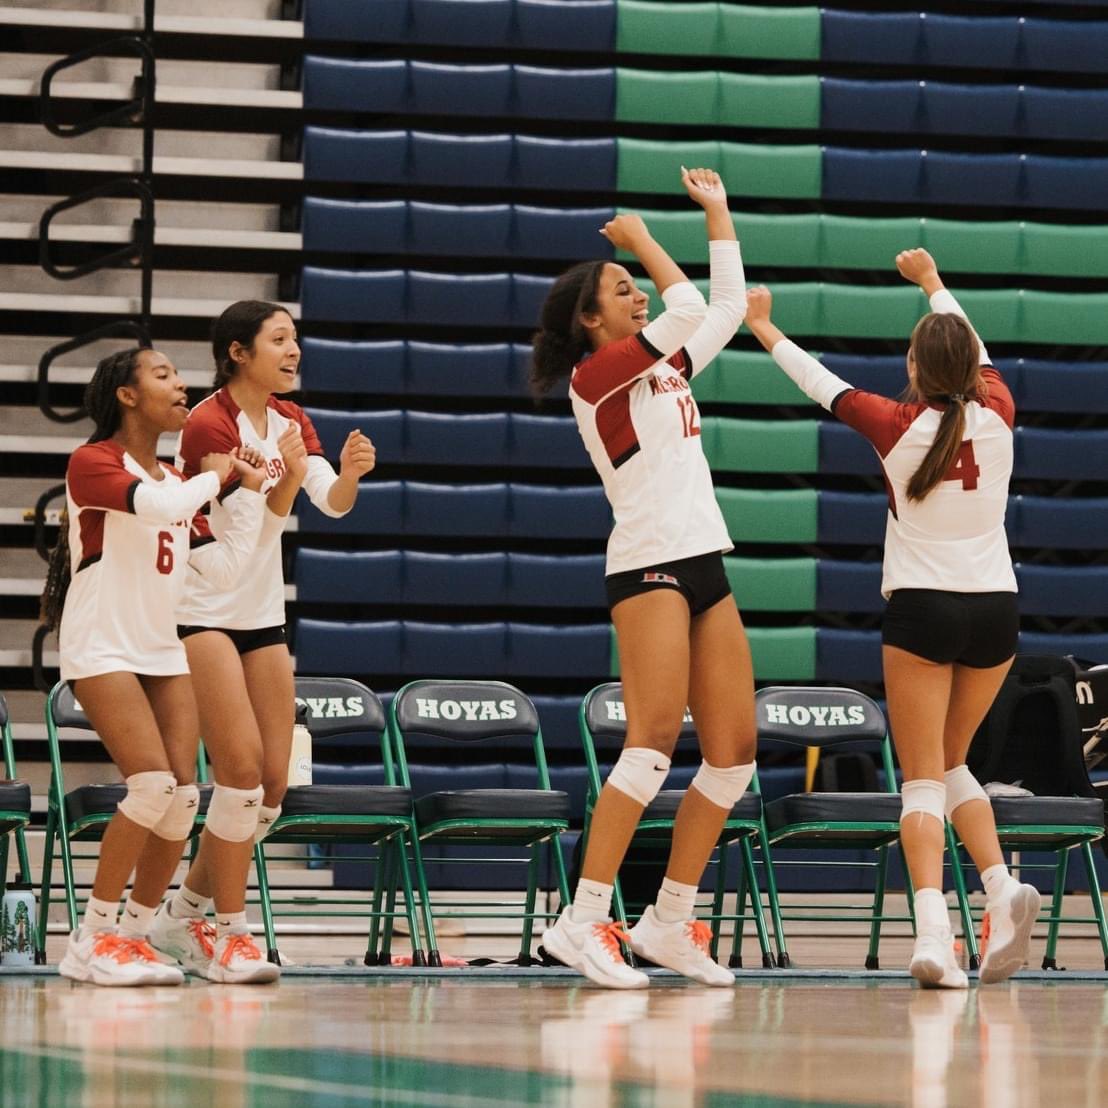 How SWEEP it is! We are headed to the Sweet 16 - Hillgrove will host Carrollton on Saturday at 6pm. See you there! 📸@m_howellsmedia #hillgrovevolleyball #GGOD #ghsaplayoffs #sweetsixteen